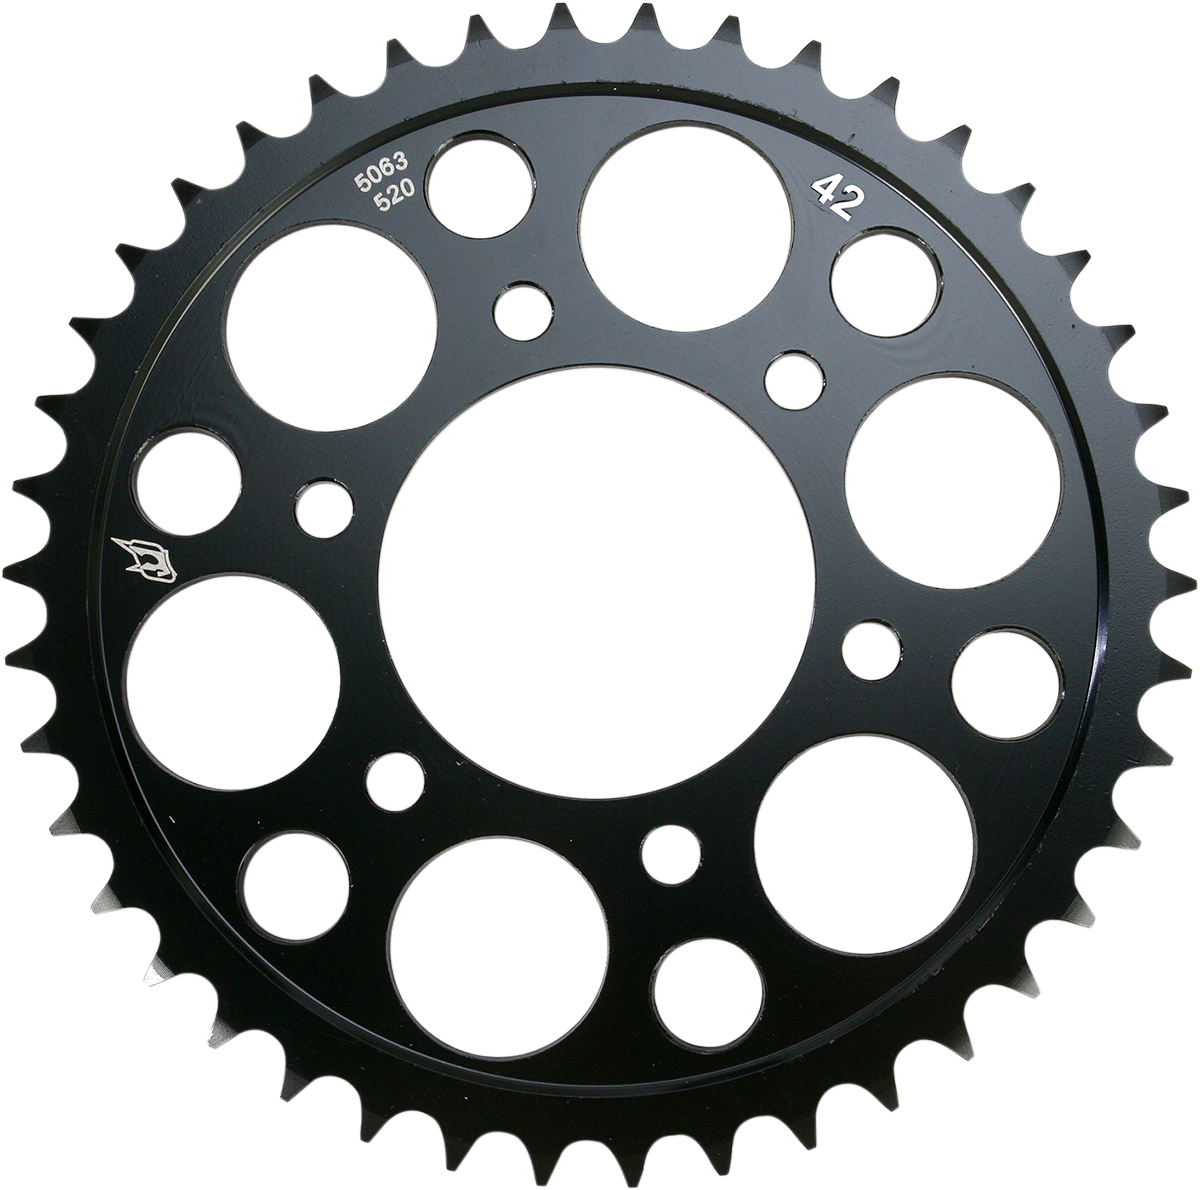 DRIVEN RACING Rear Sprocket - 43 Tooth 5063-520-43T